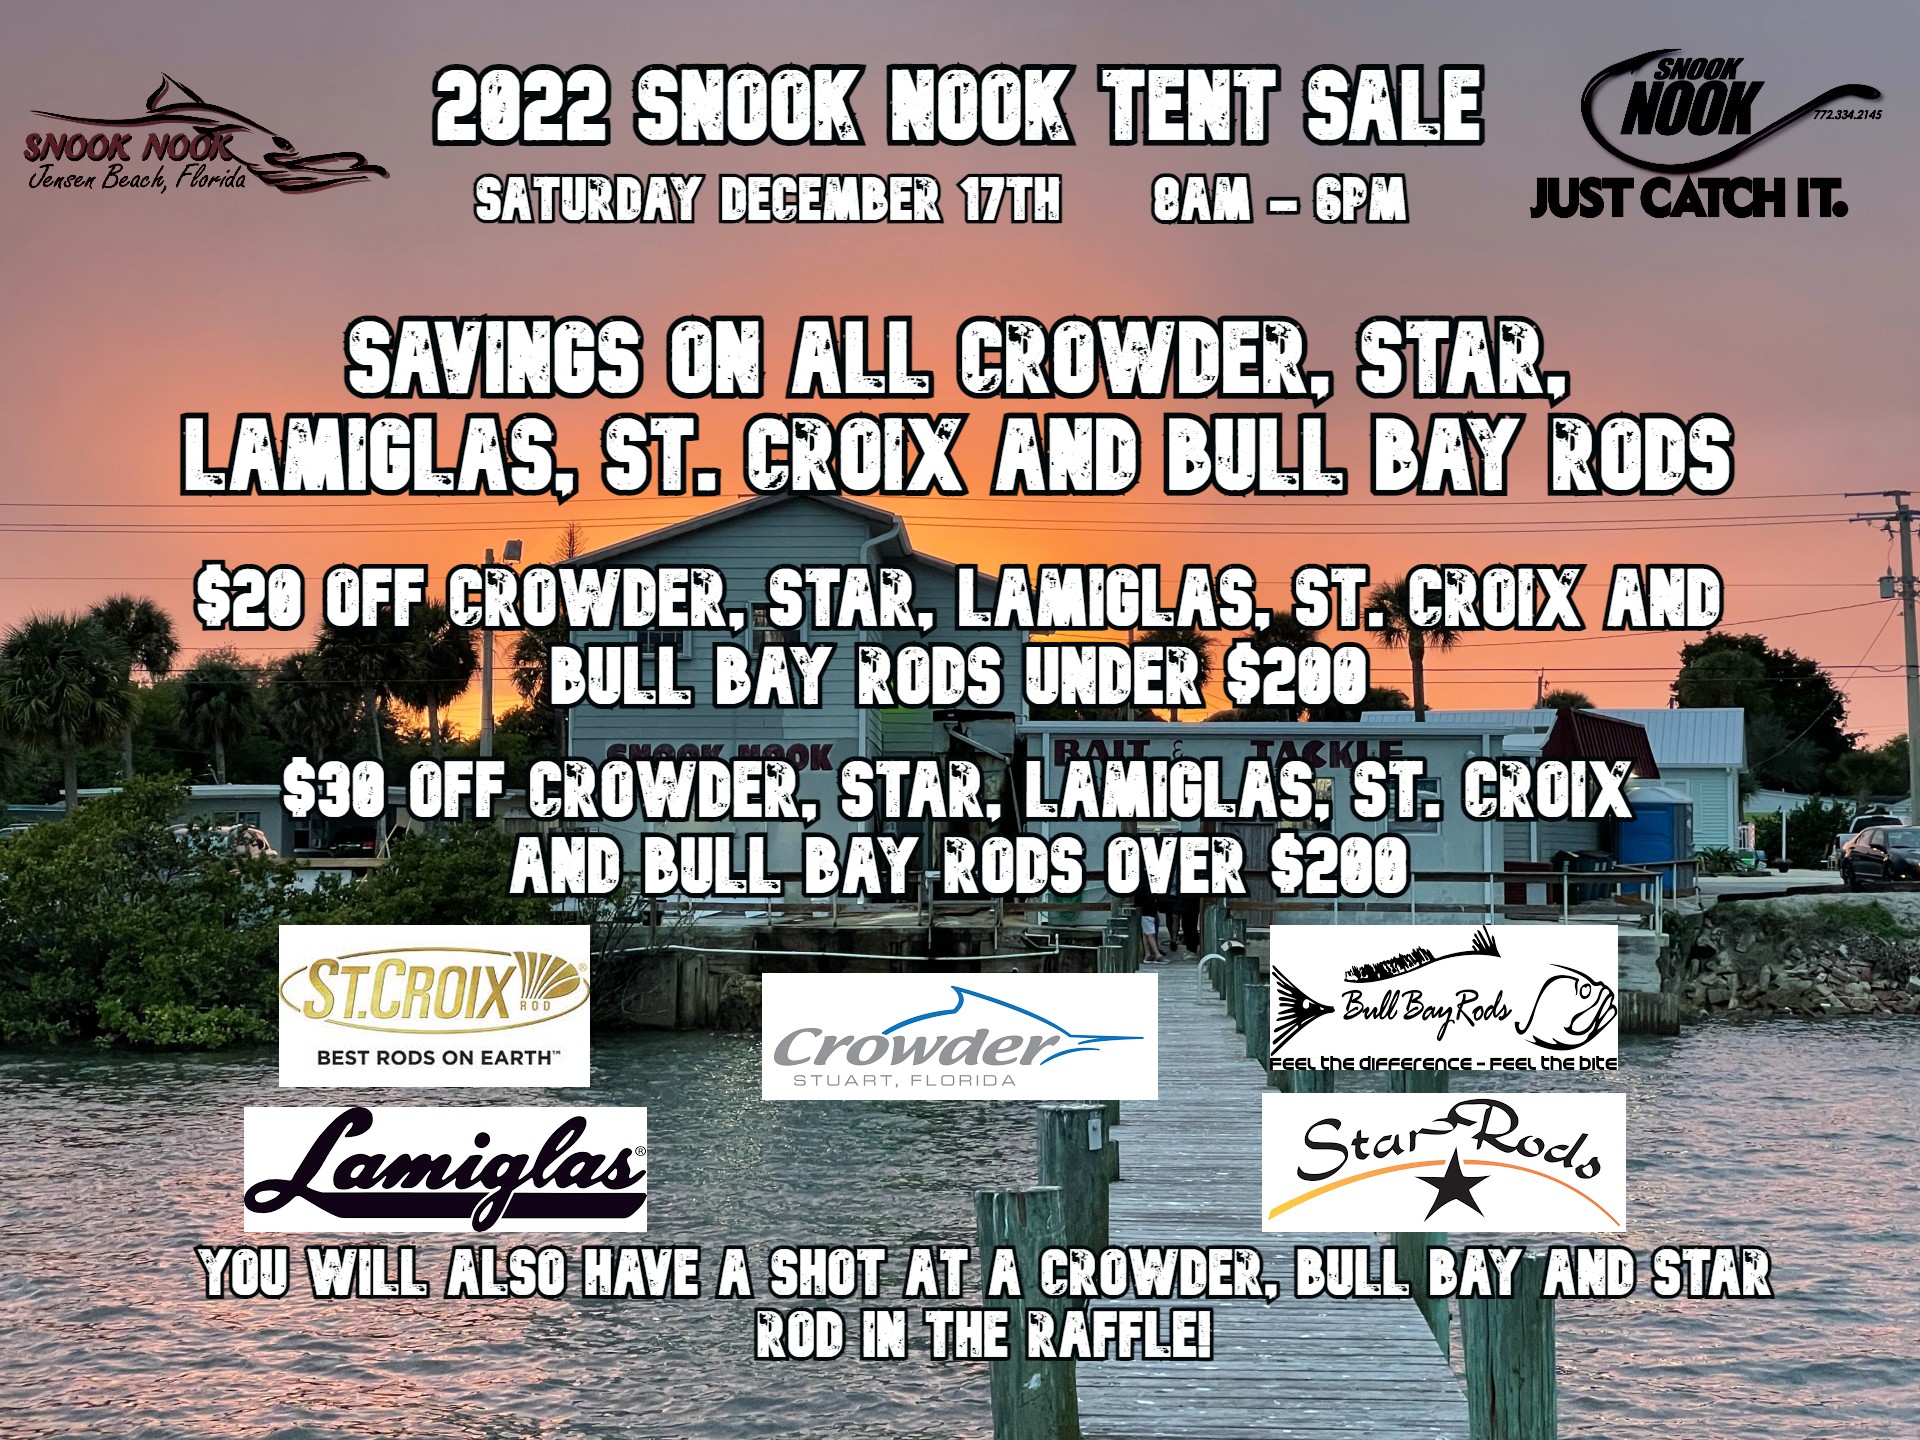 Crowder, Star, St. Croix, Lamiglas and Bull Bay Rods Tent Sale Promotion